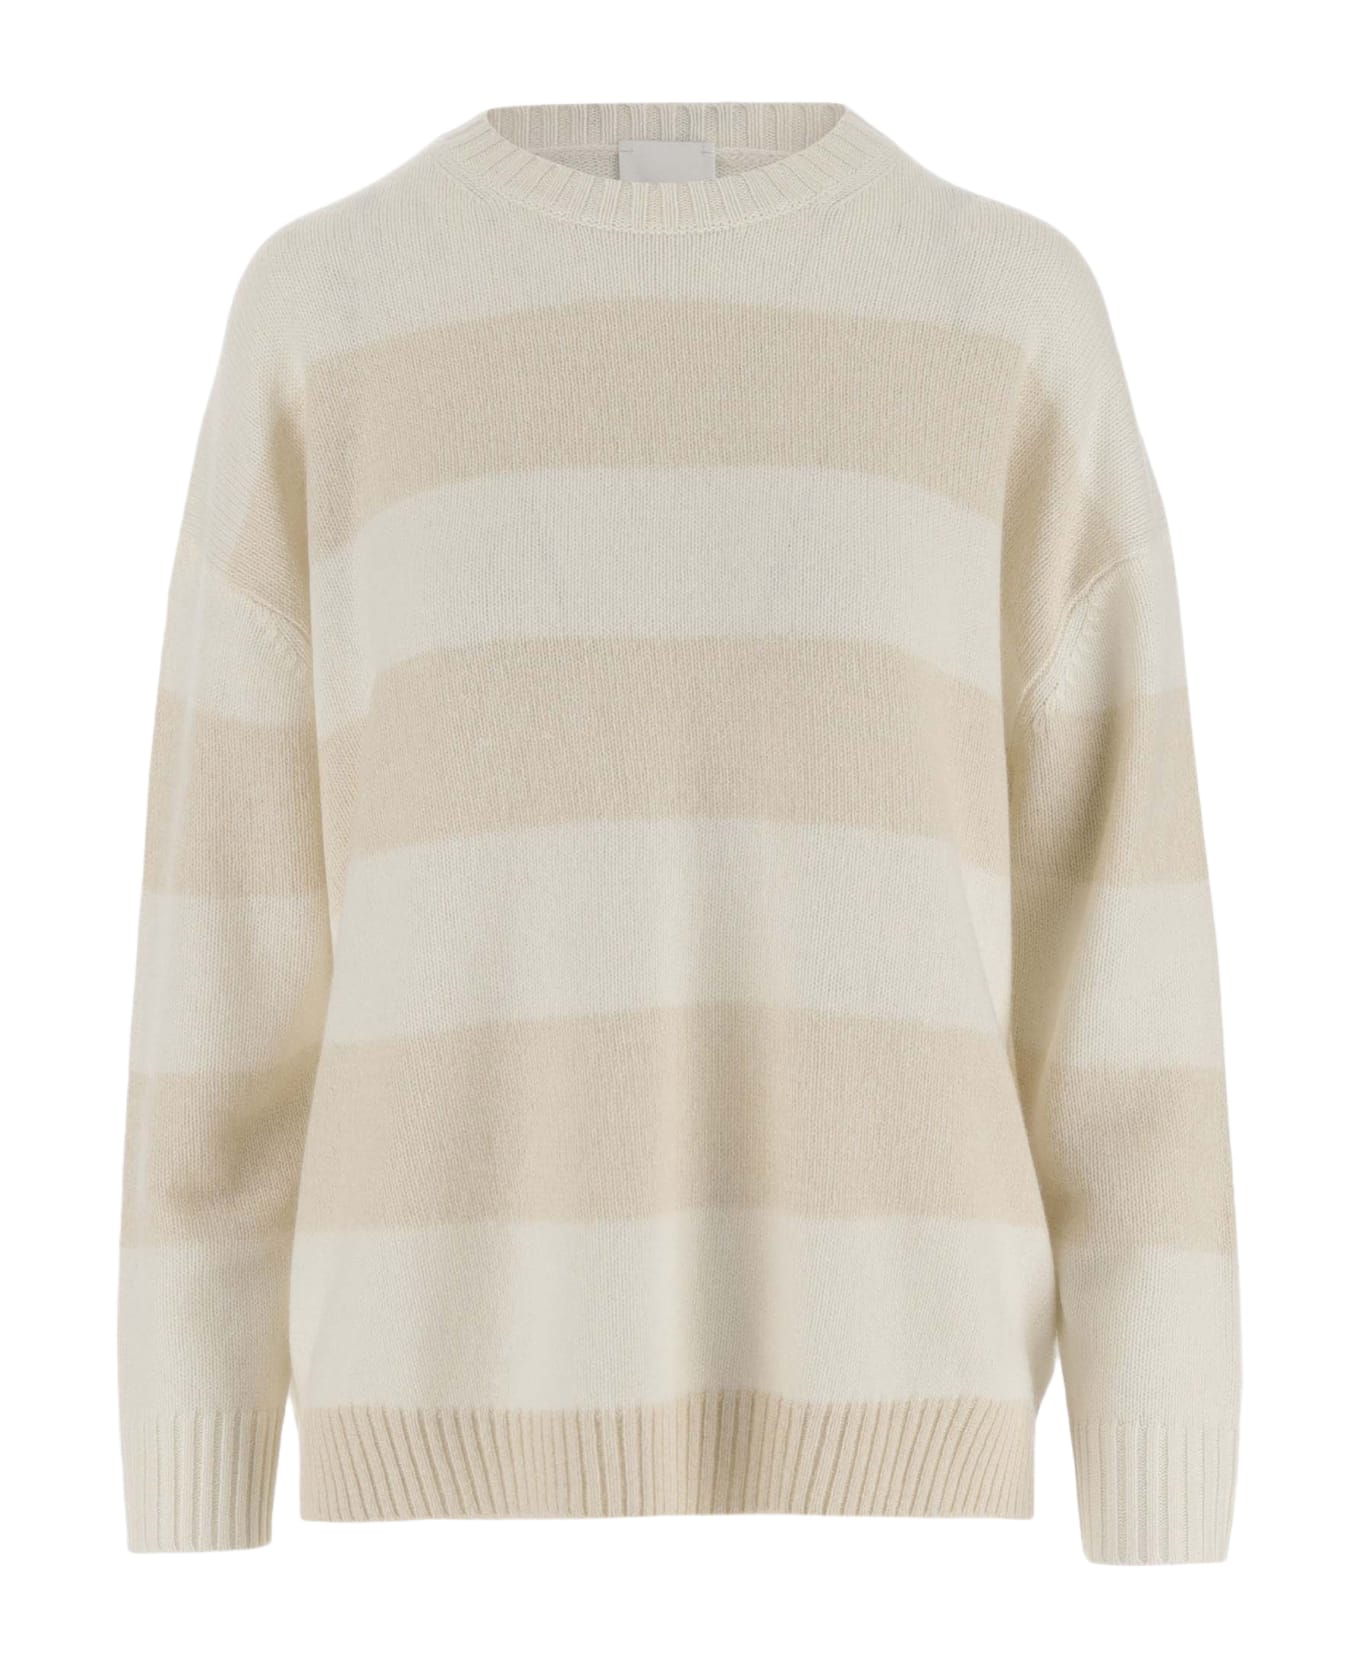 Allude Wool And Cashmere Blend Striped Sweater - Red ニットウェア